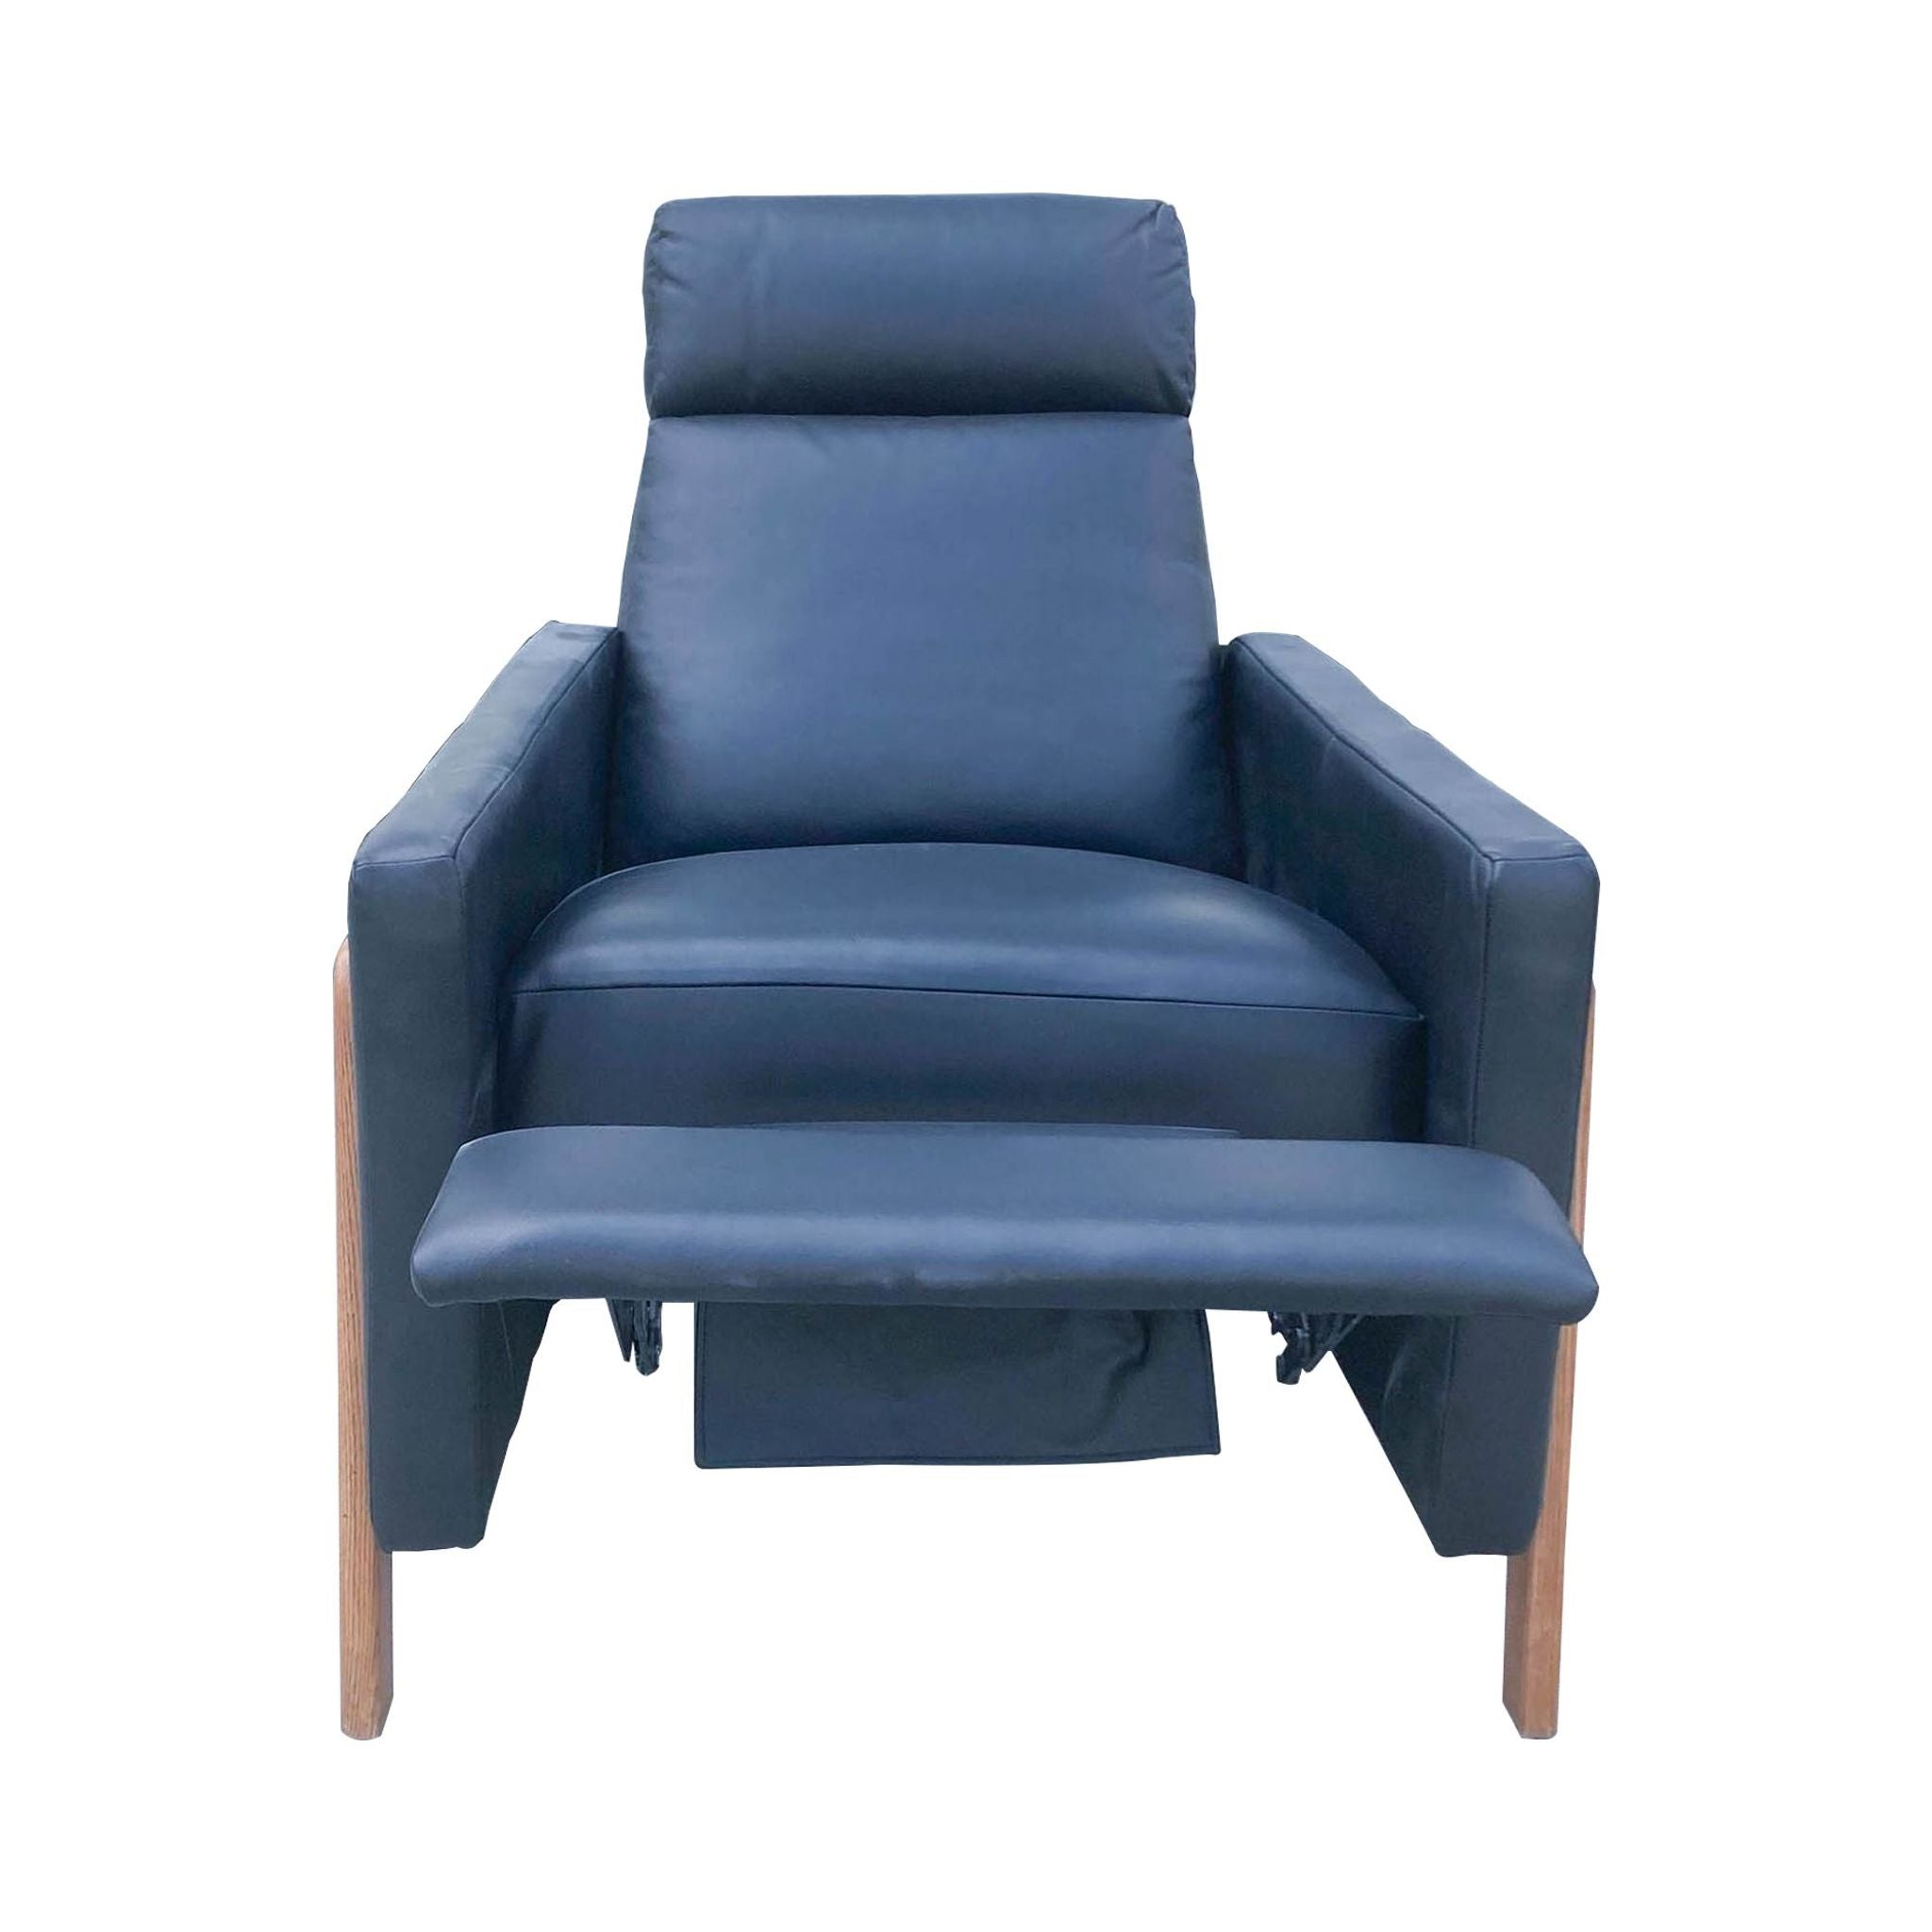 West Elm Spencer Recliner in a reclined position, highlighting the push-back function with visible leg support.